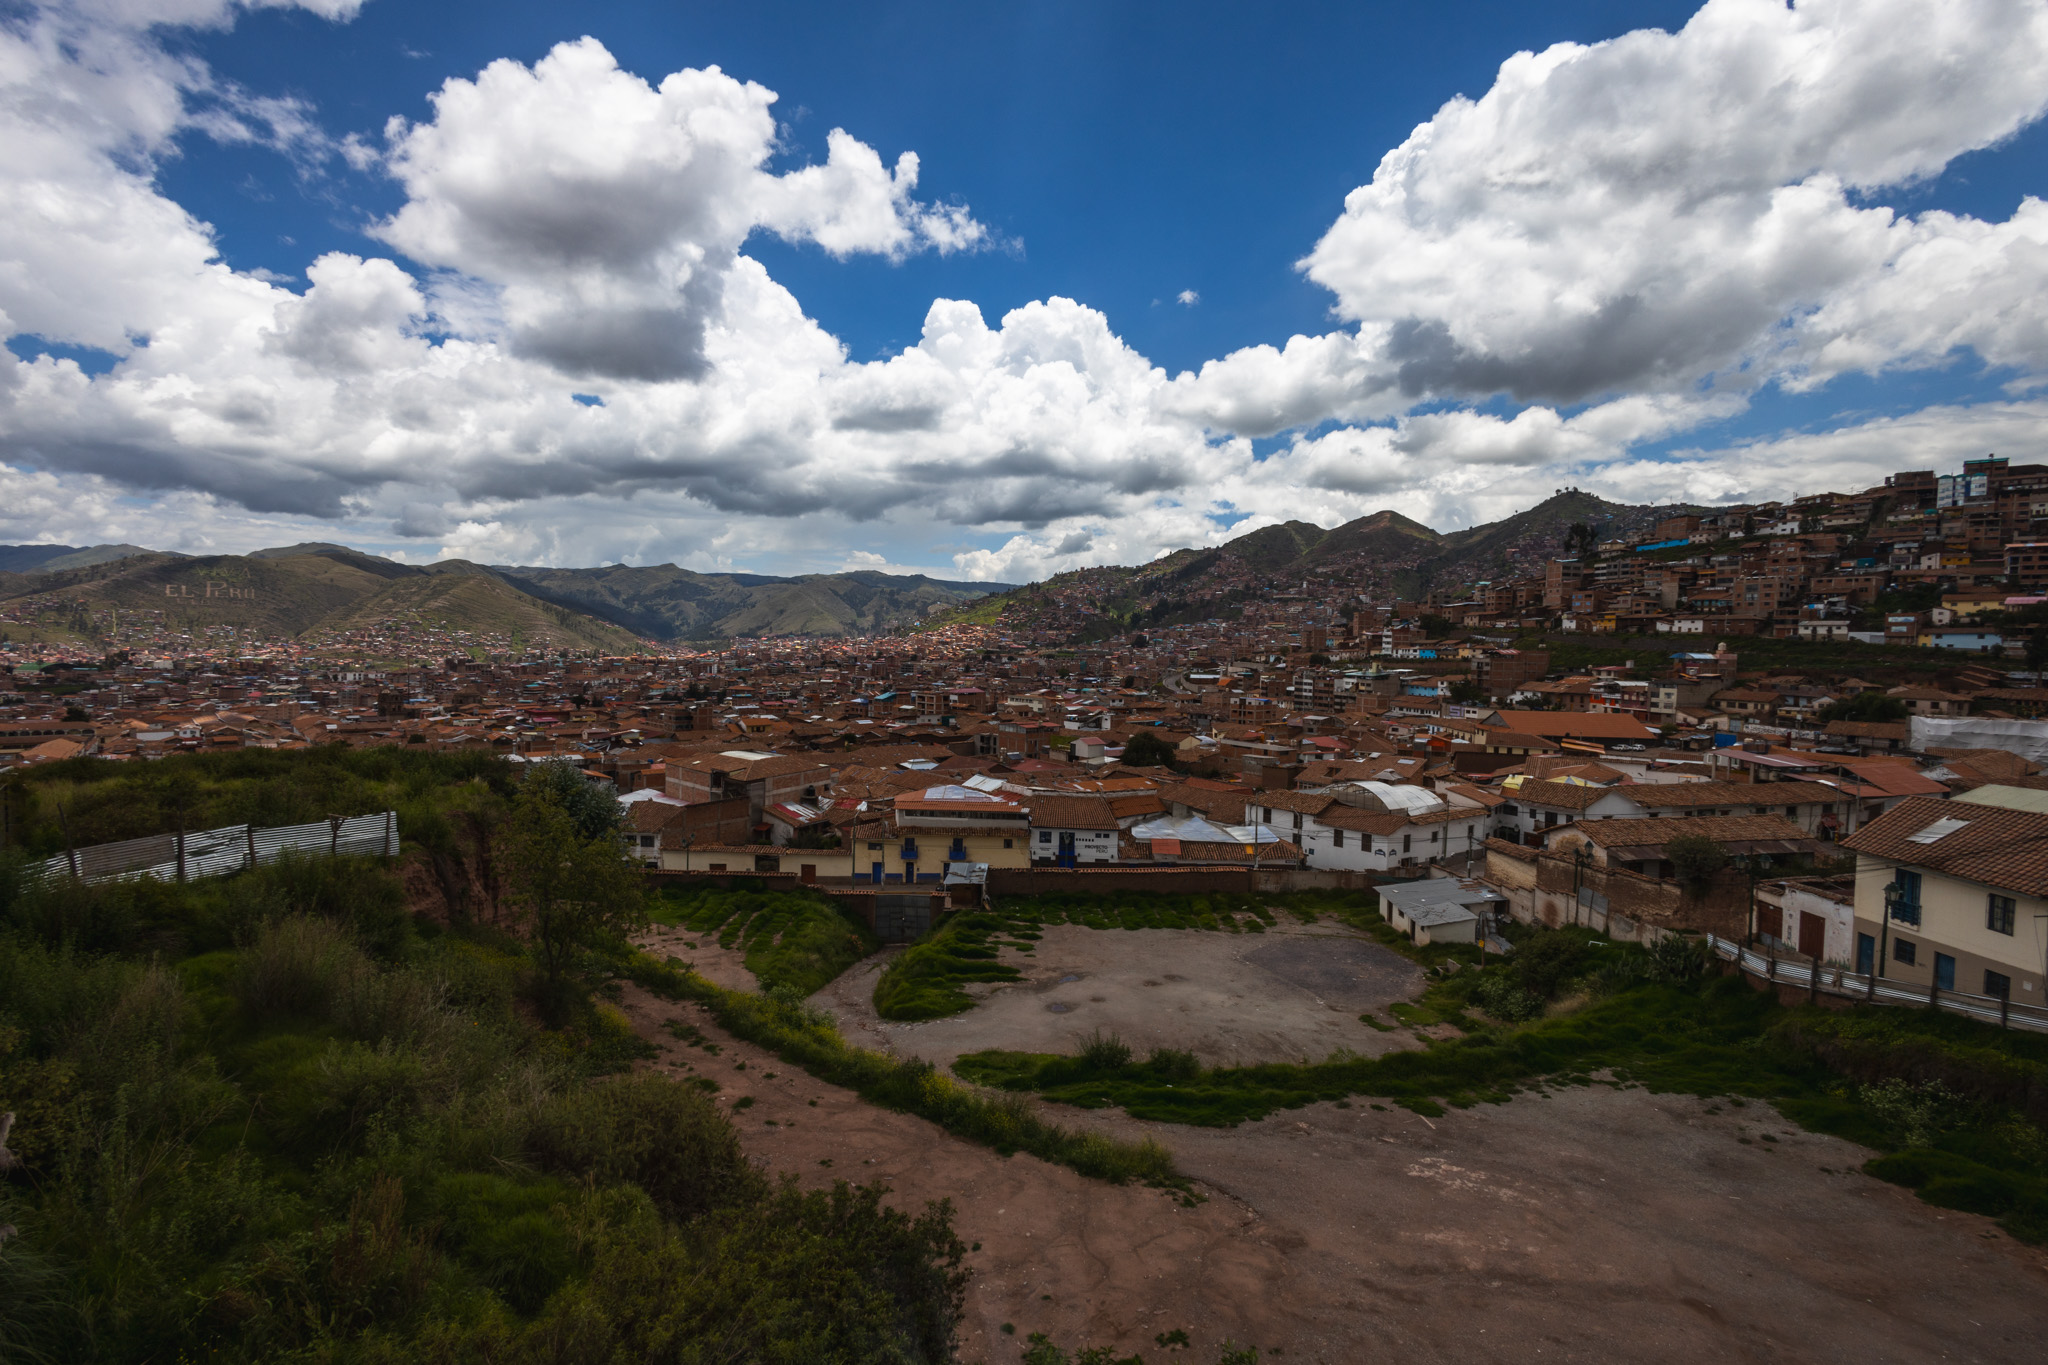 The view from our hotel in Cusco